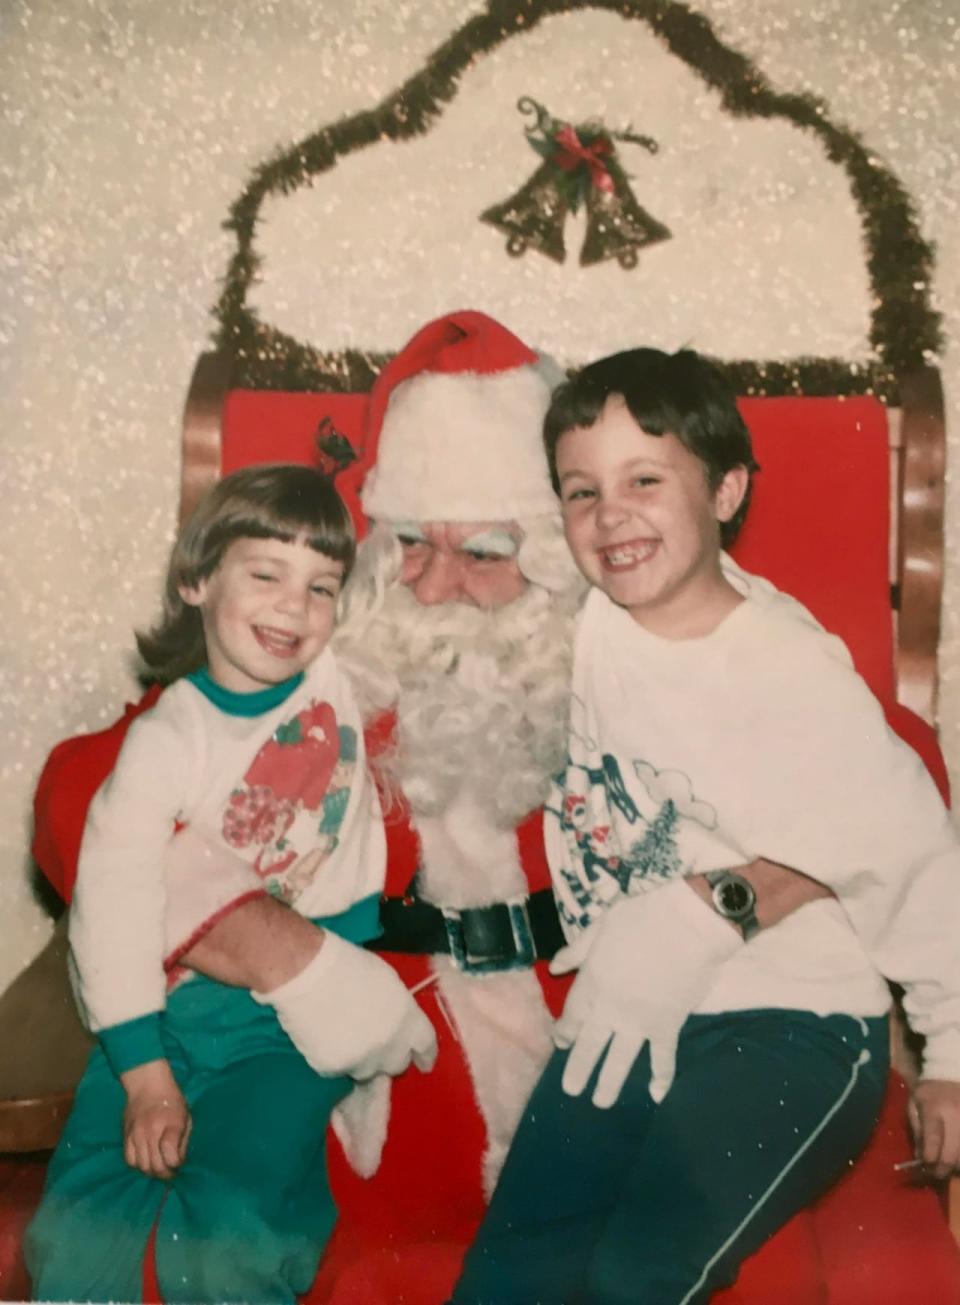 Sisters Melinda and Sonya sit on Santa's lap in the early 1980s. Mel Campbell started giving his daughters Life Savers books in their stockings when Sonya, the older daughter, was 2.